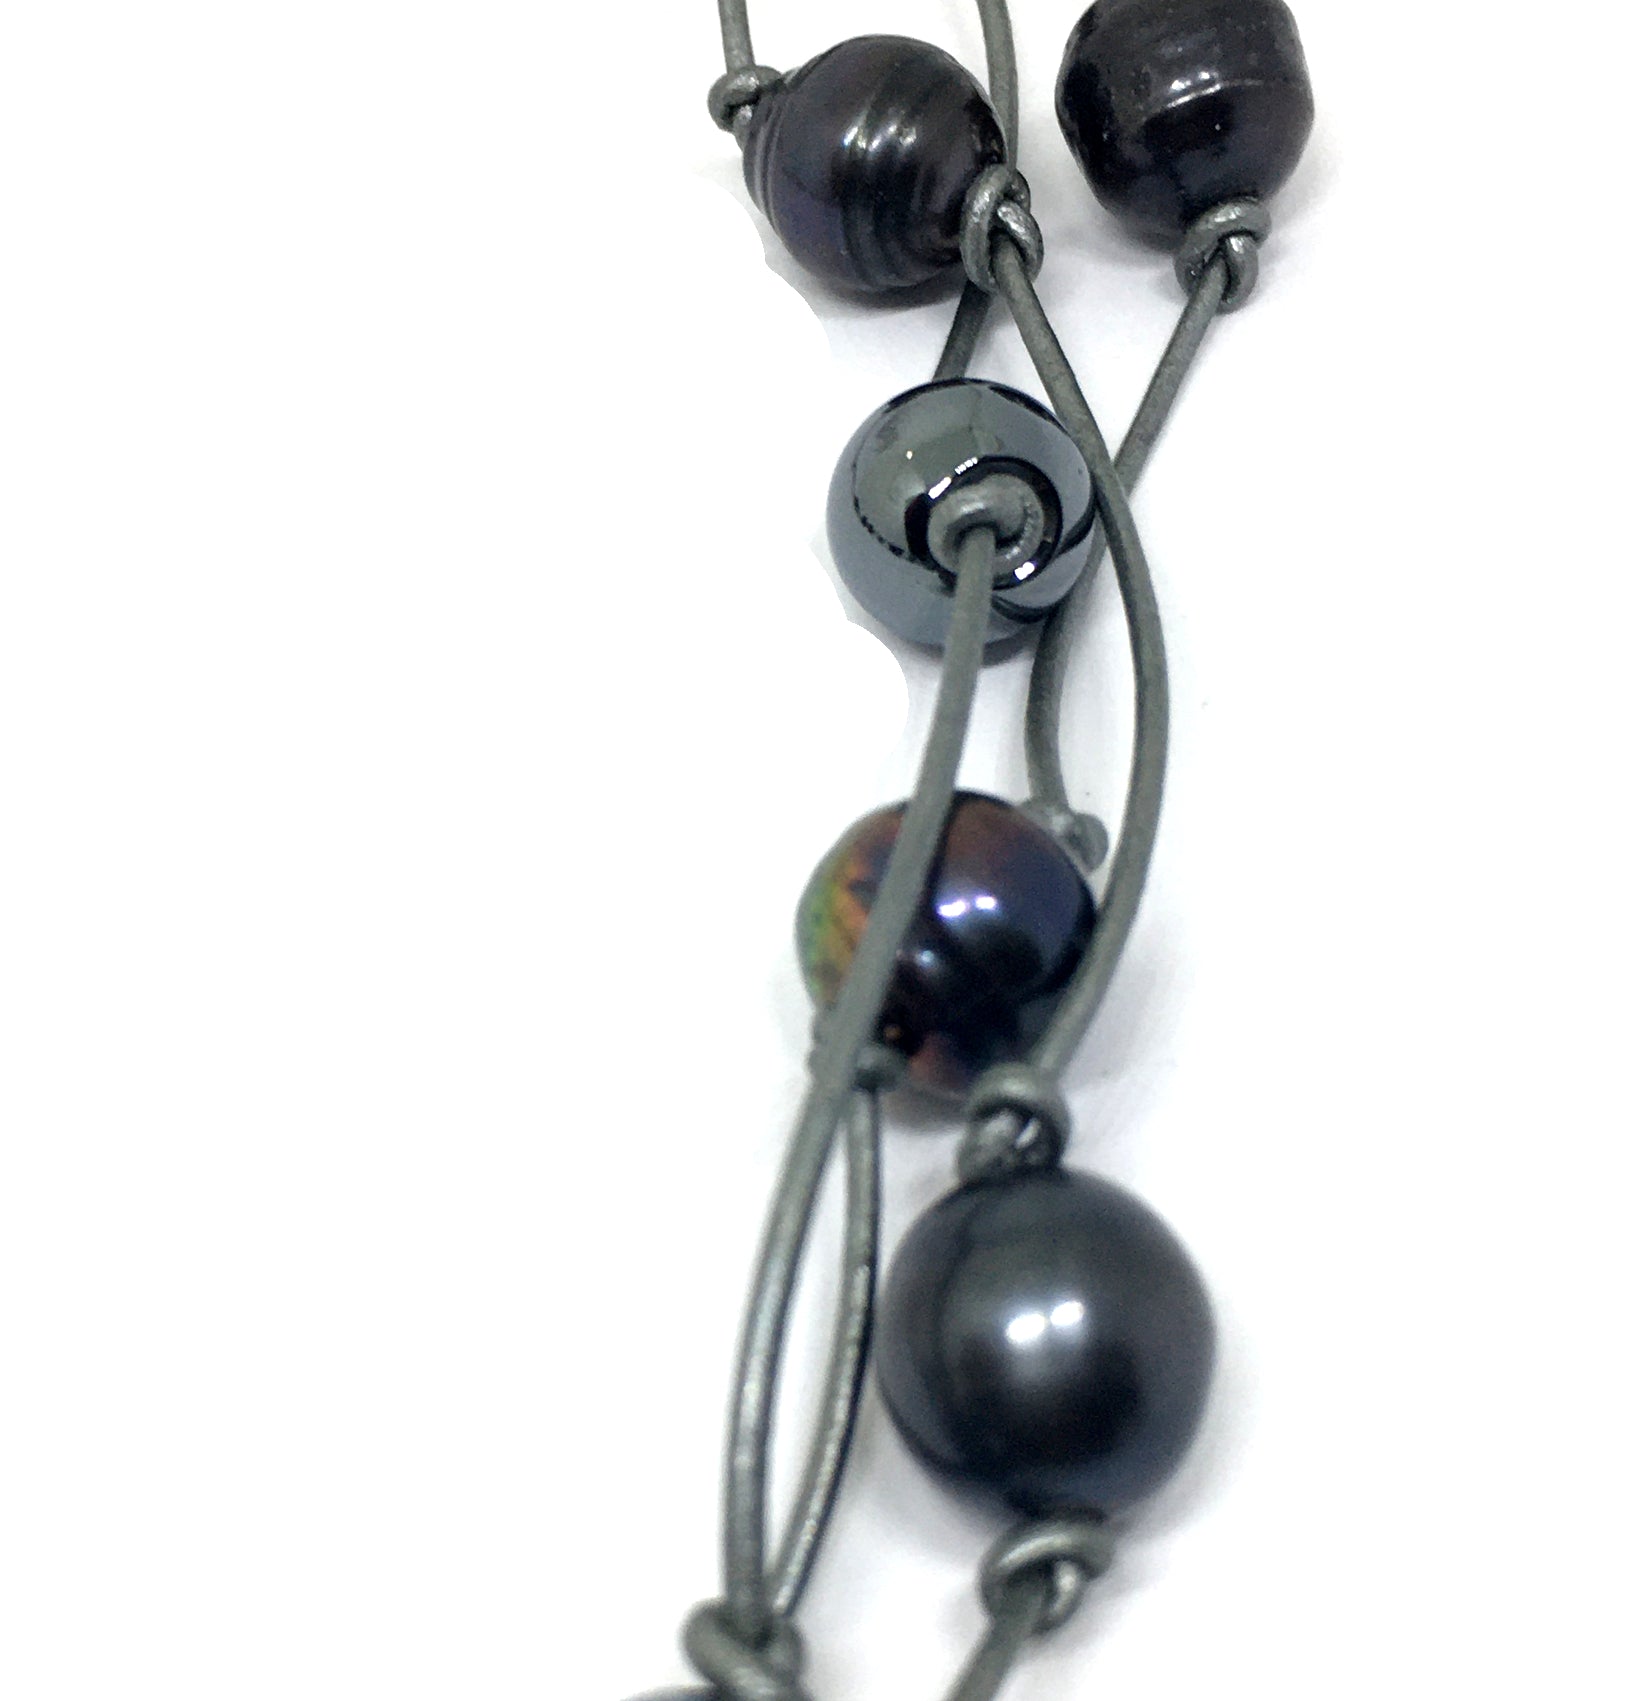 Black Peacock Pearl and Hematite Adjustable Knotted Leather